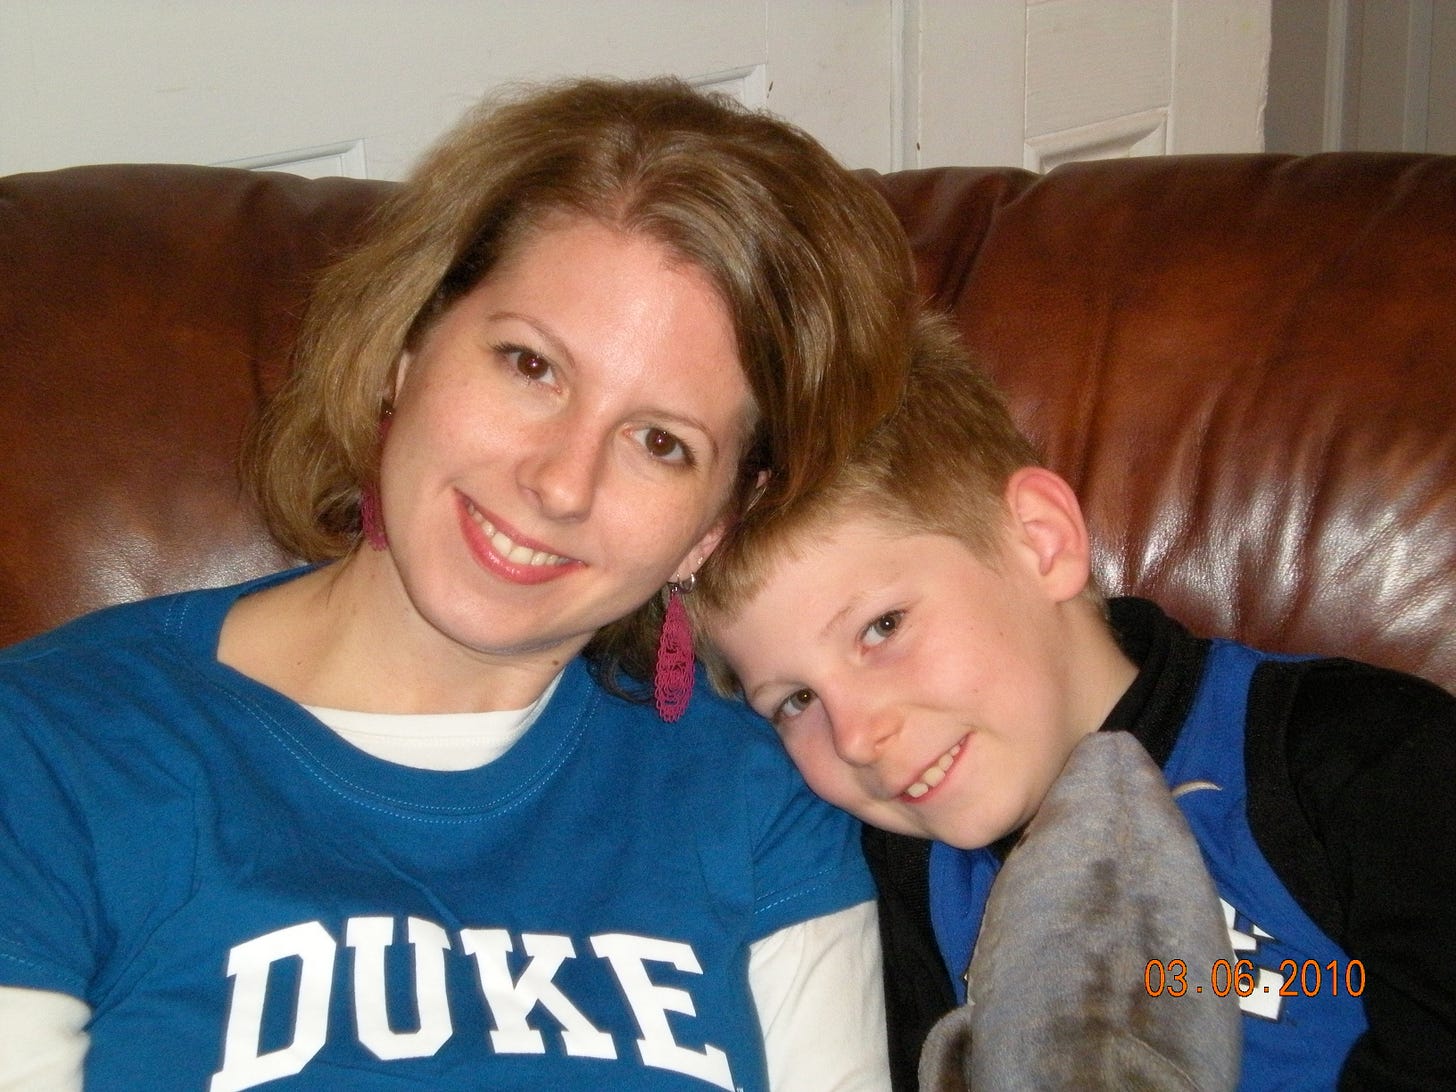 Evan and Heather in Duke shirts